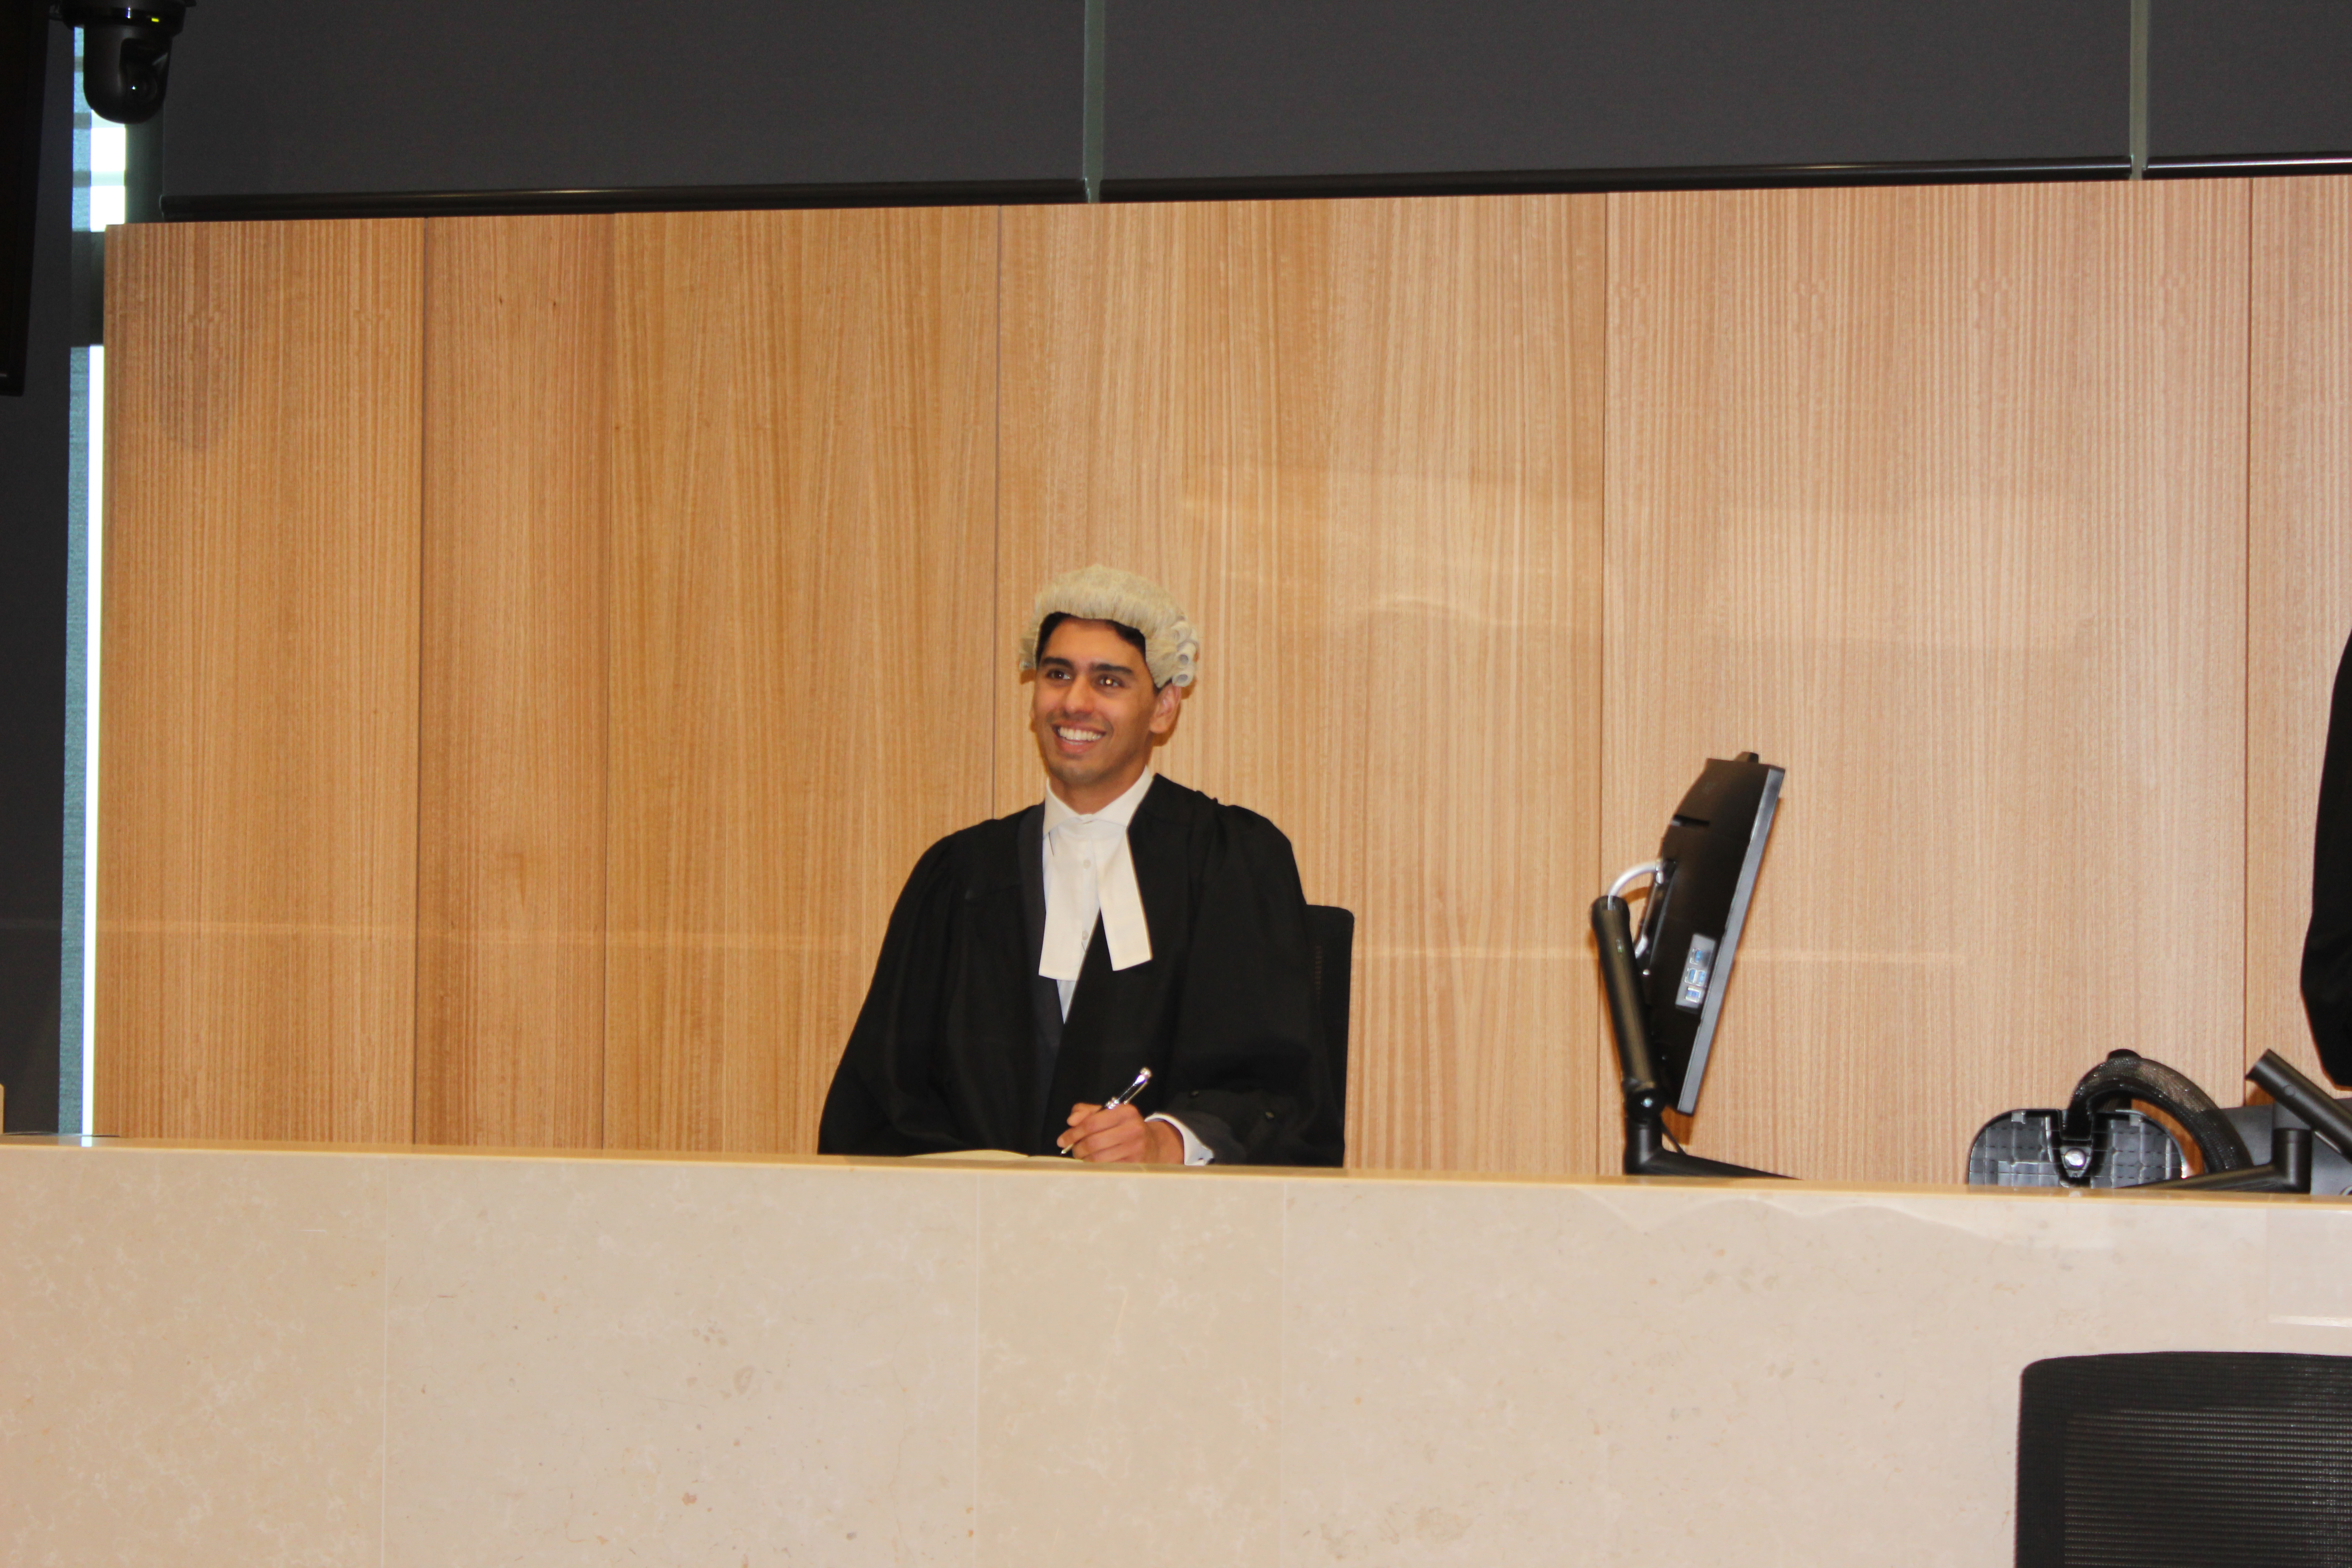 Ravi sits in the court room wearing a black gown and a while curly wig. He is smiling.